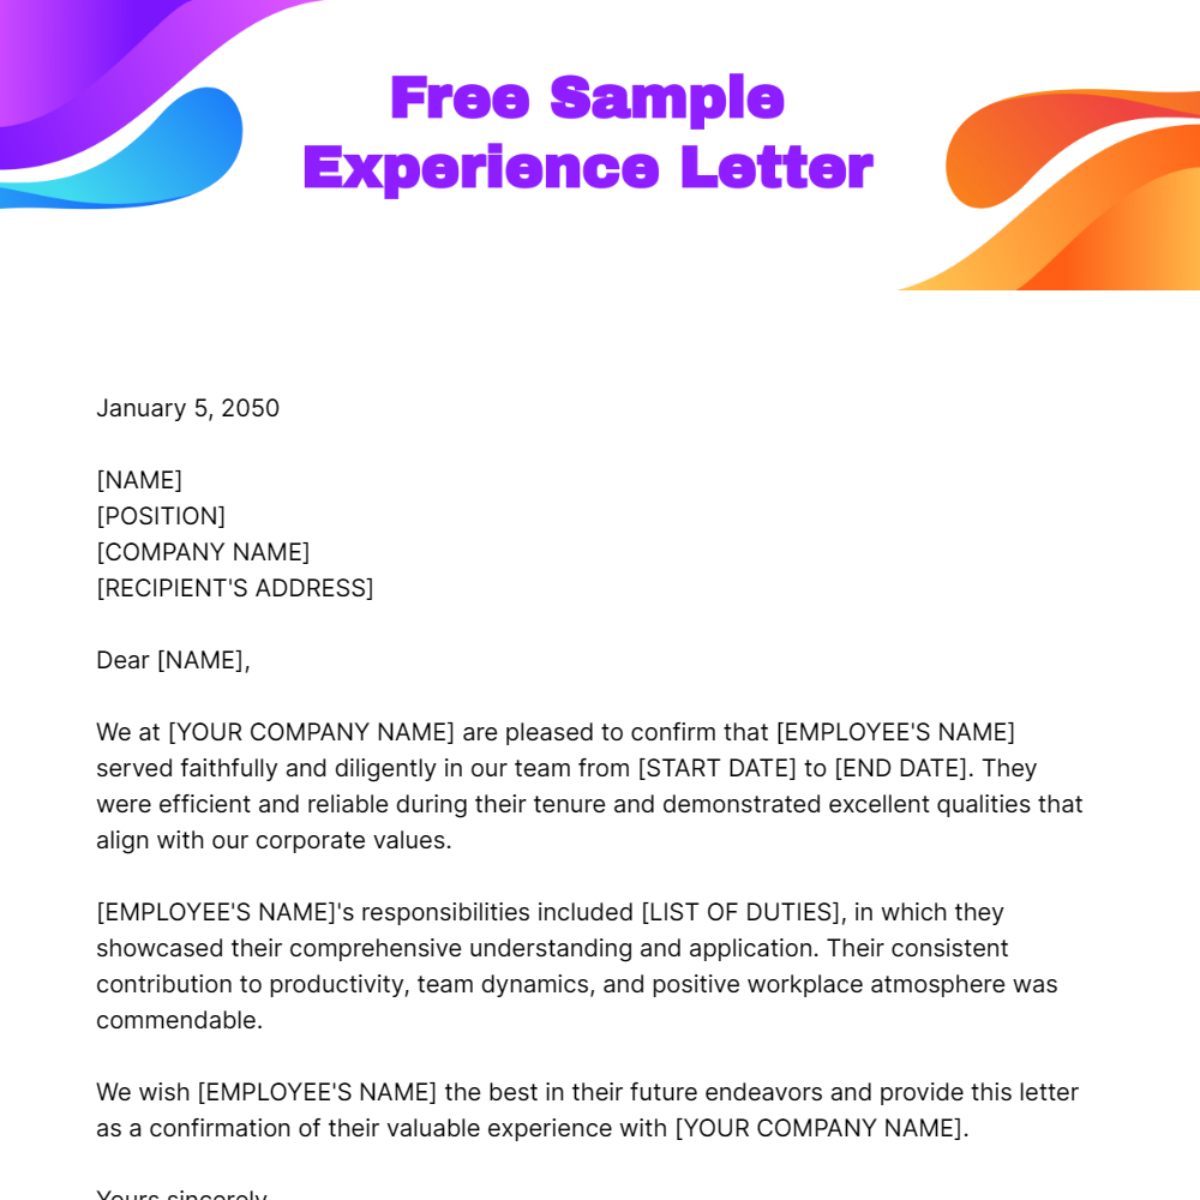 Sample Experience Letter Template